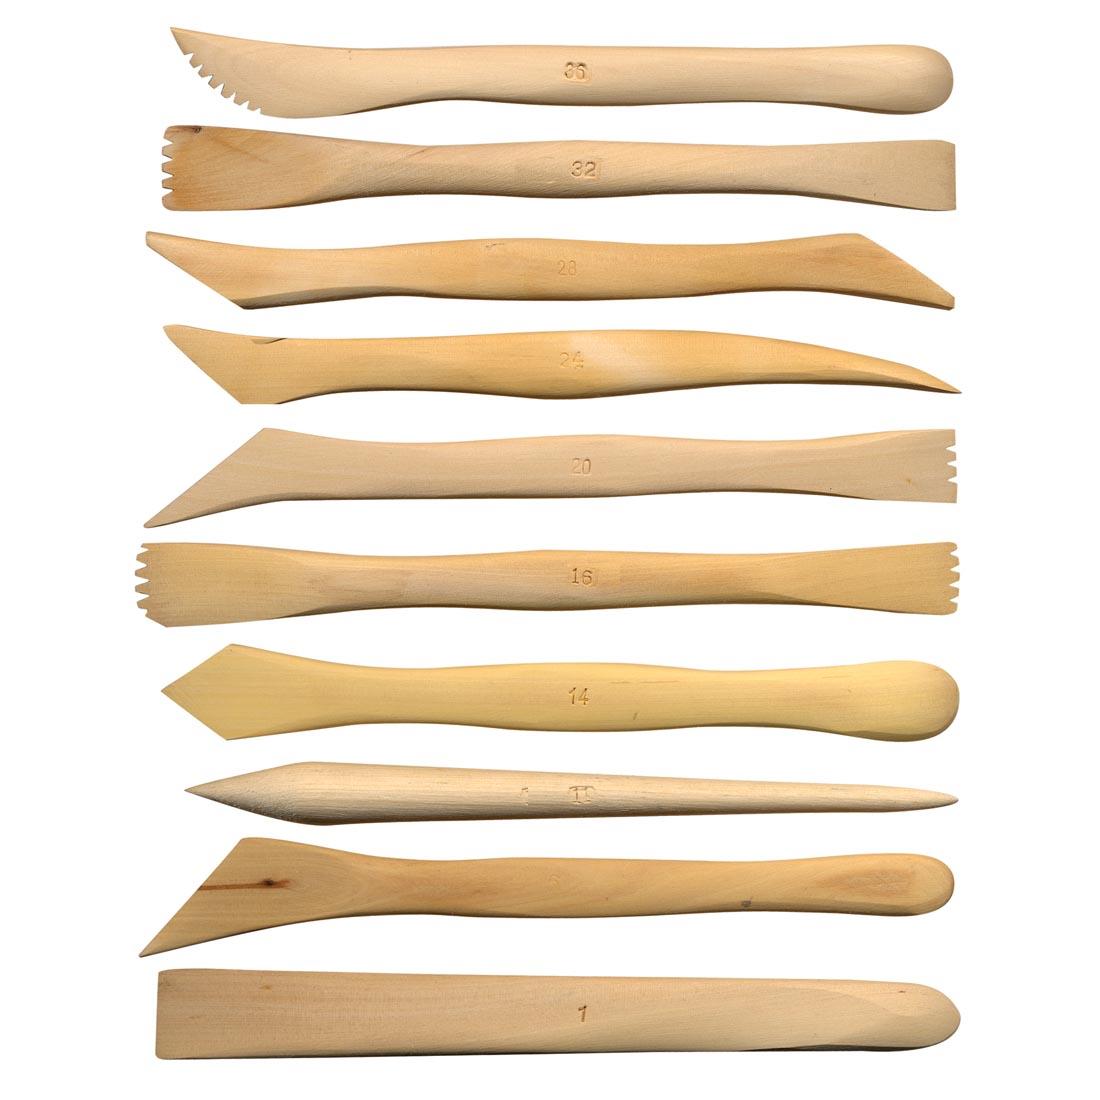 Richeson 10-Piece Wooden Modeling Tool Set